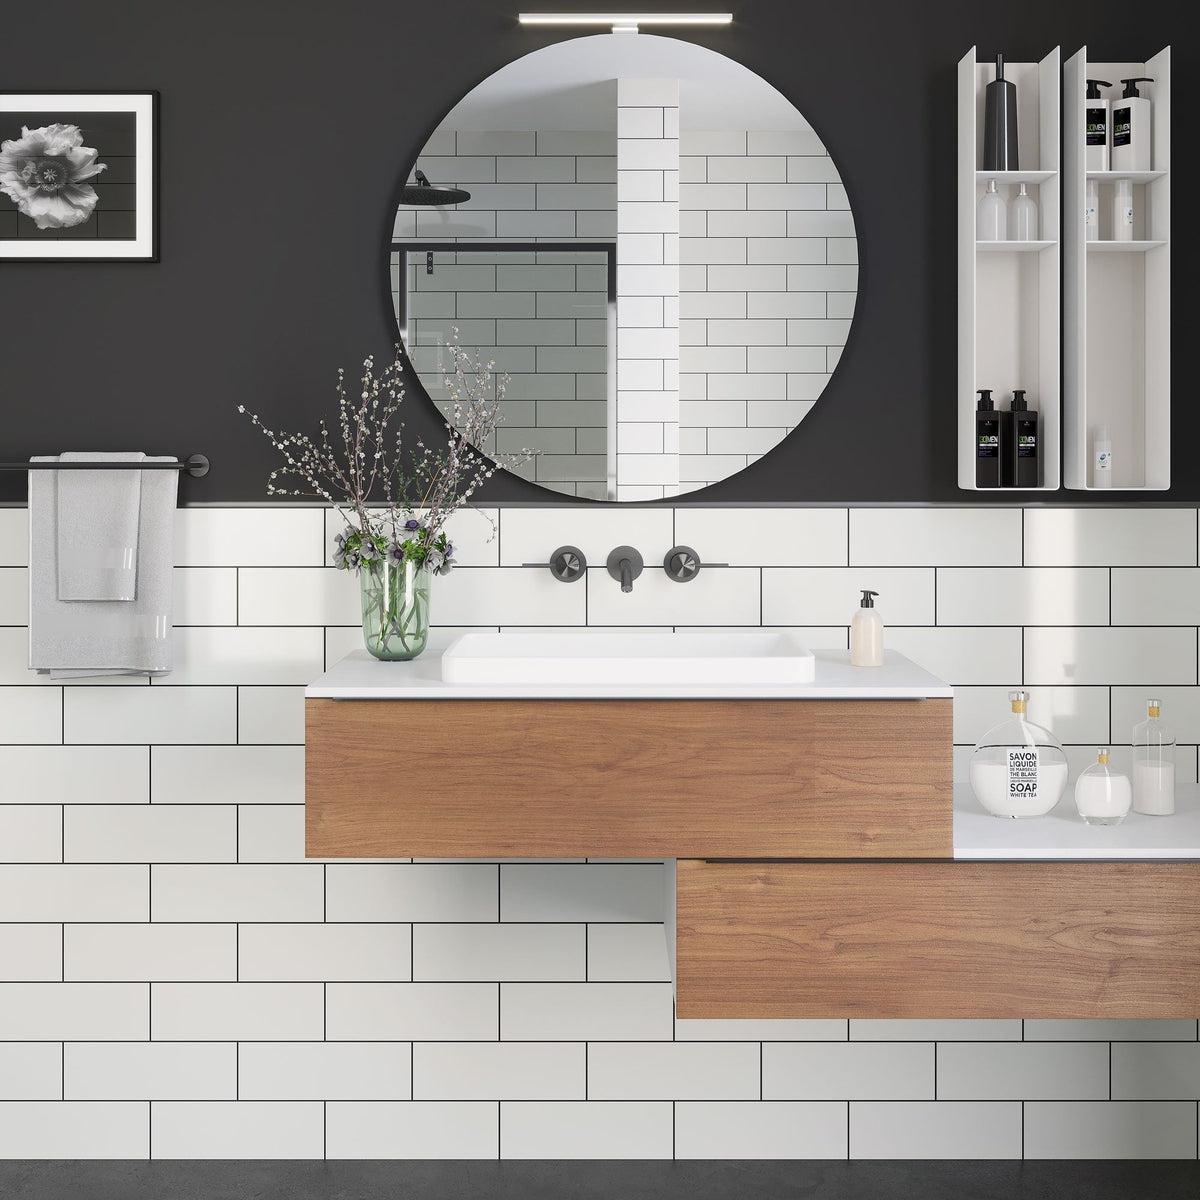 Polished White Ceramic Subway Wall Tile 4x12 Wall in Bathroom of Black & White